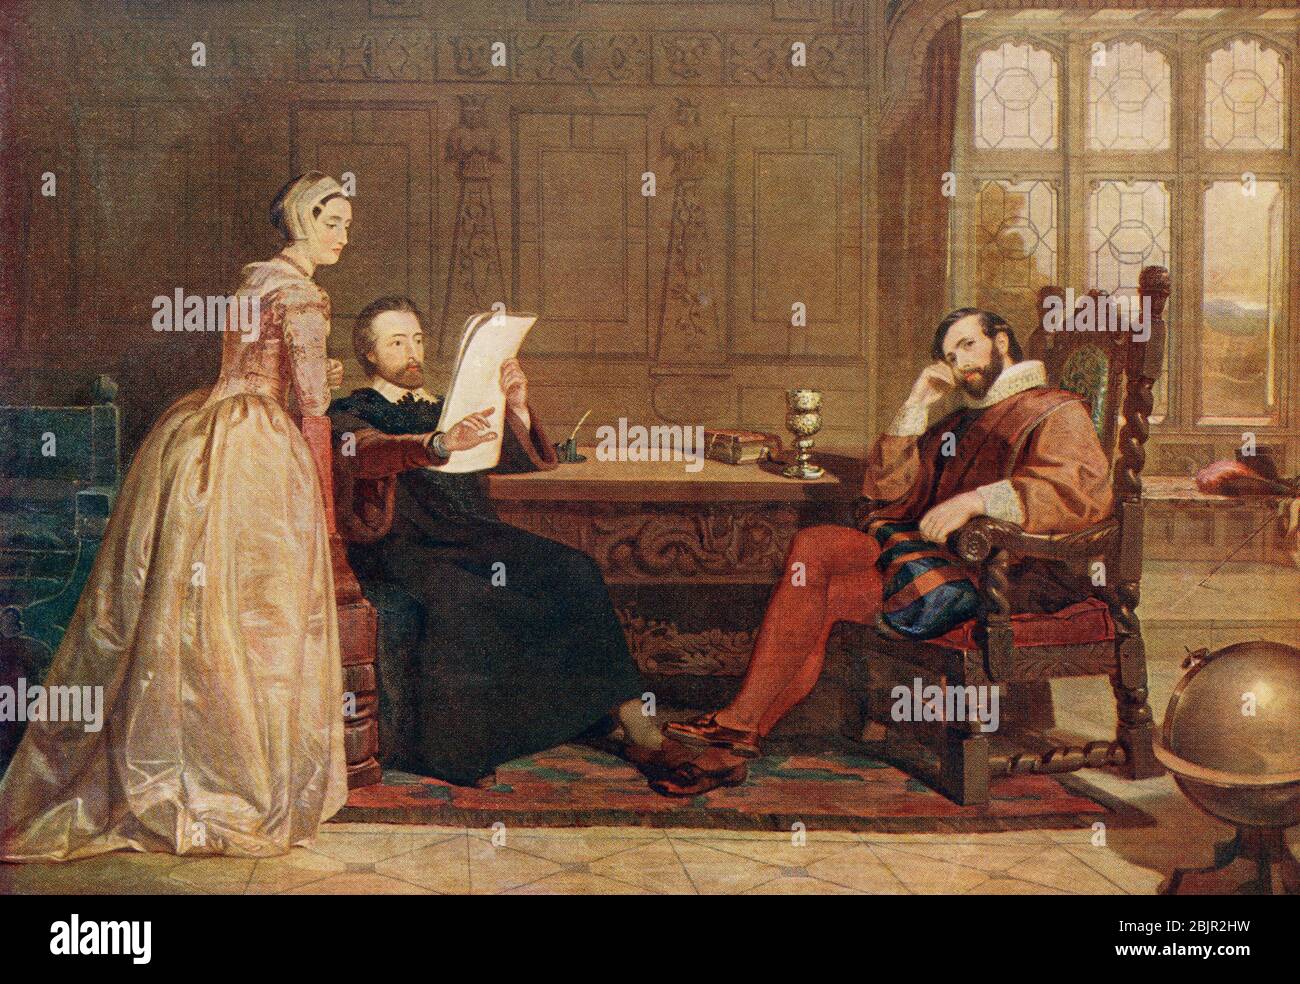 Spenser reading The Fairy Queen to Sir Walter Raleigh. Edmund Spenser, 1552/1553 – 1599.  English poet.  Sir Walter Raleigh, c. 1552 /1554 - 1618.  English landed gentleman, writer, poet, soldier, politician, courtier, spy and explorer.  After the painting by John Claxton.  From Britain and Her Neighbours, 1485 - 1688, published 1923. Stock Photo